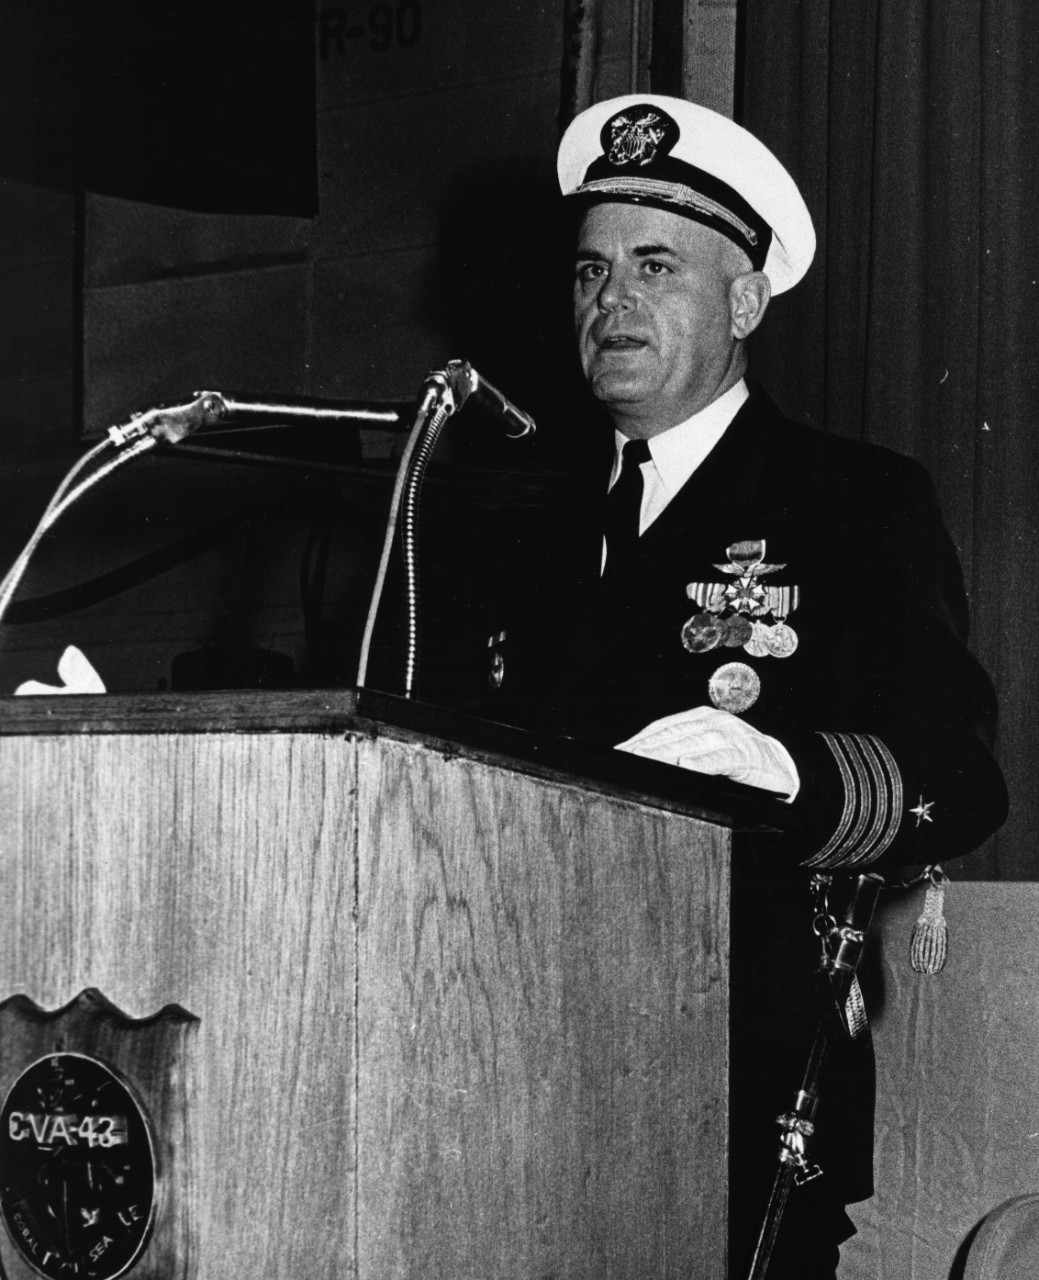 Captain Frank W. Ault reads his new orders during USS Coral Sea's change of command ceremony, 18 March 1967. Captain Ault, after 13 months of outstanding leadership aboard Coral Sea, will report for duty on the staff of Commander Naval Air Forces, US Pacific Fleet with headquarters located in San Diego, California.